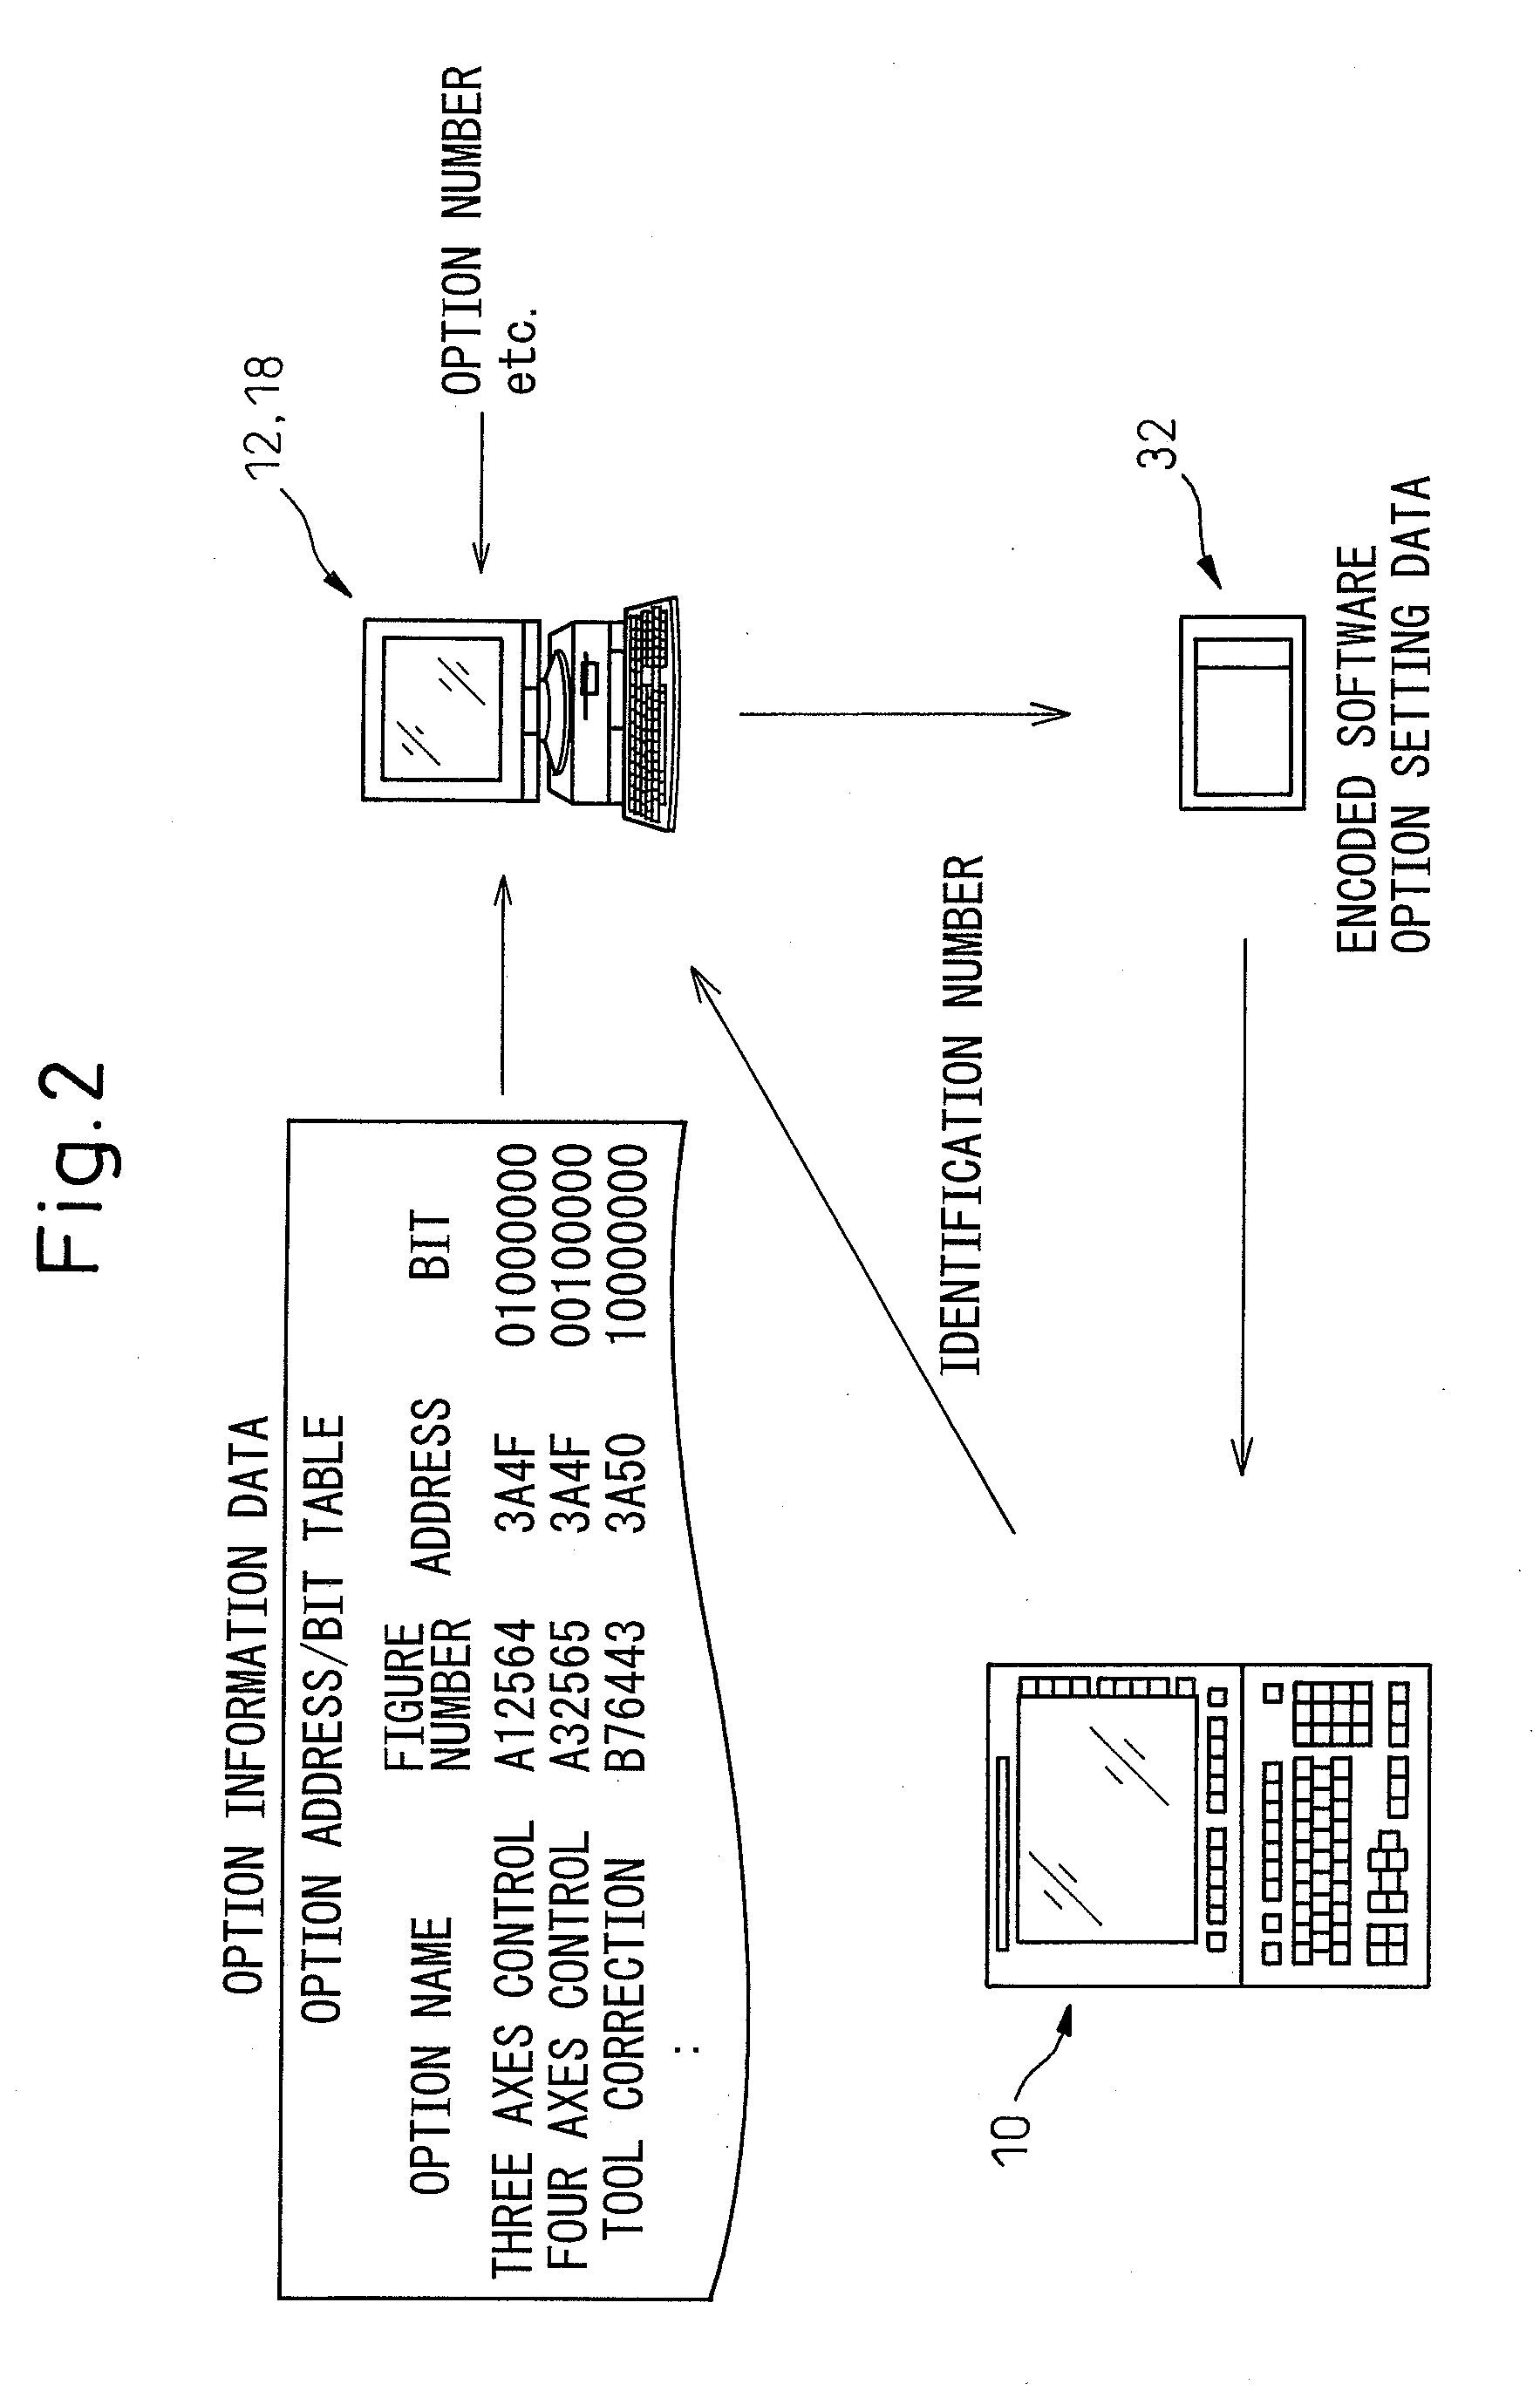 System and method for setting software option of numeric control device